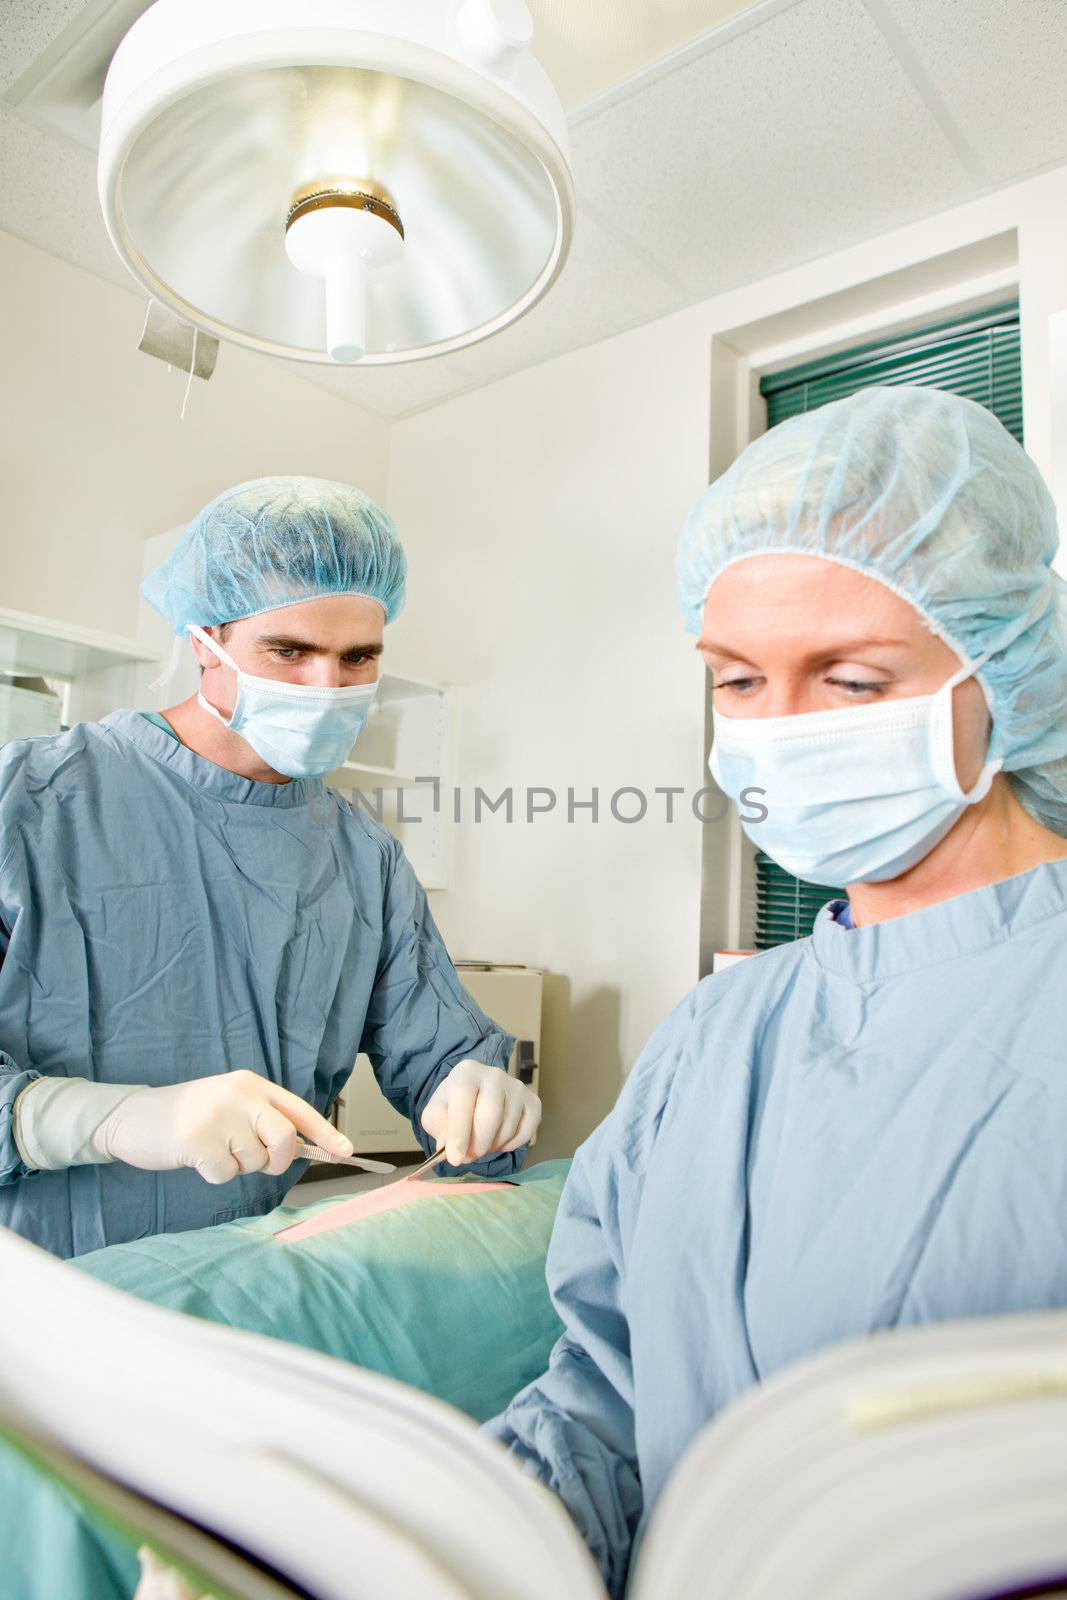 A surgeon unsure of the operation following a manual